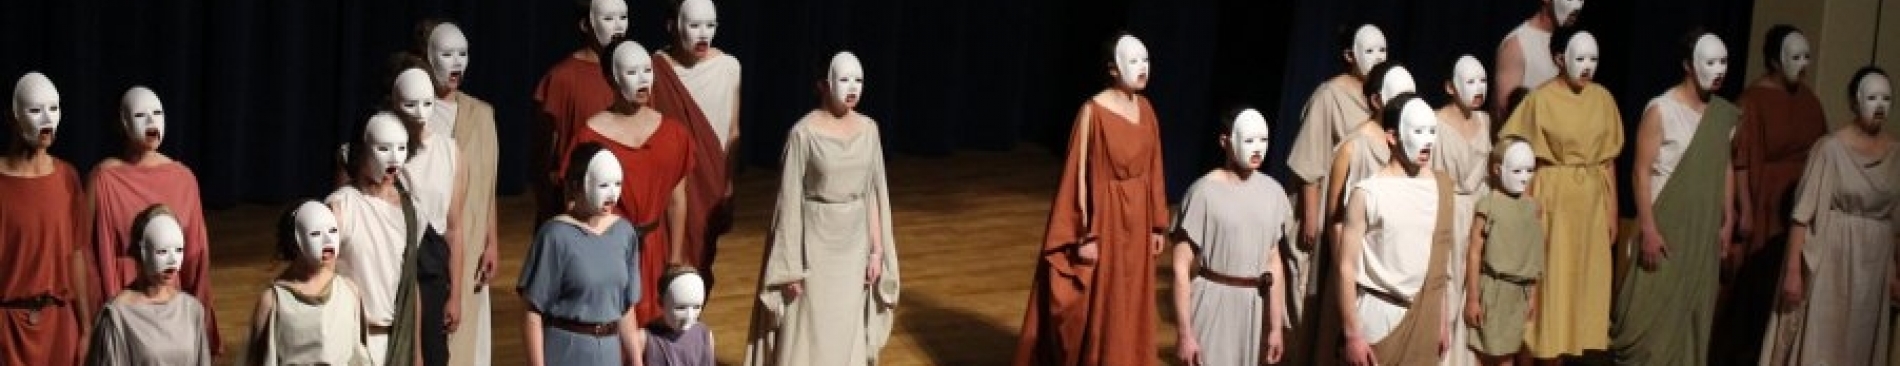 Slideshow: The St. Genesius Players’ Performance of Sophocle